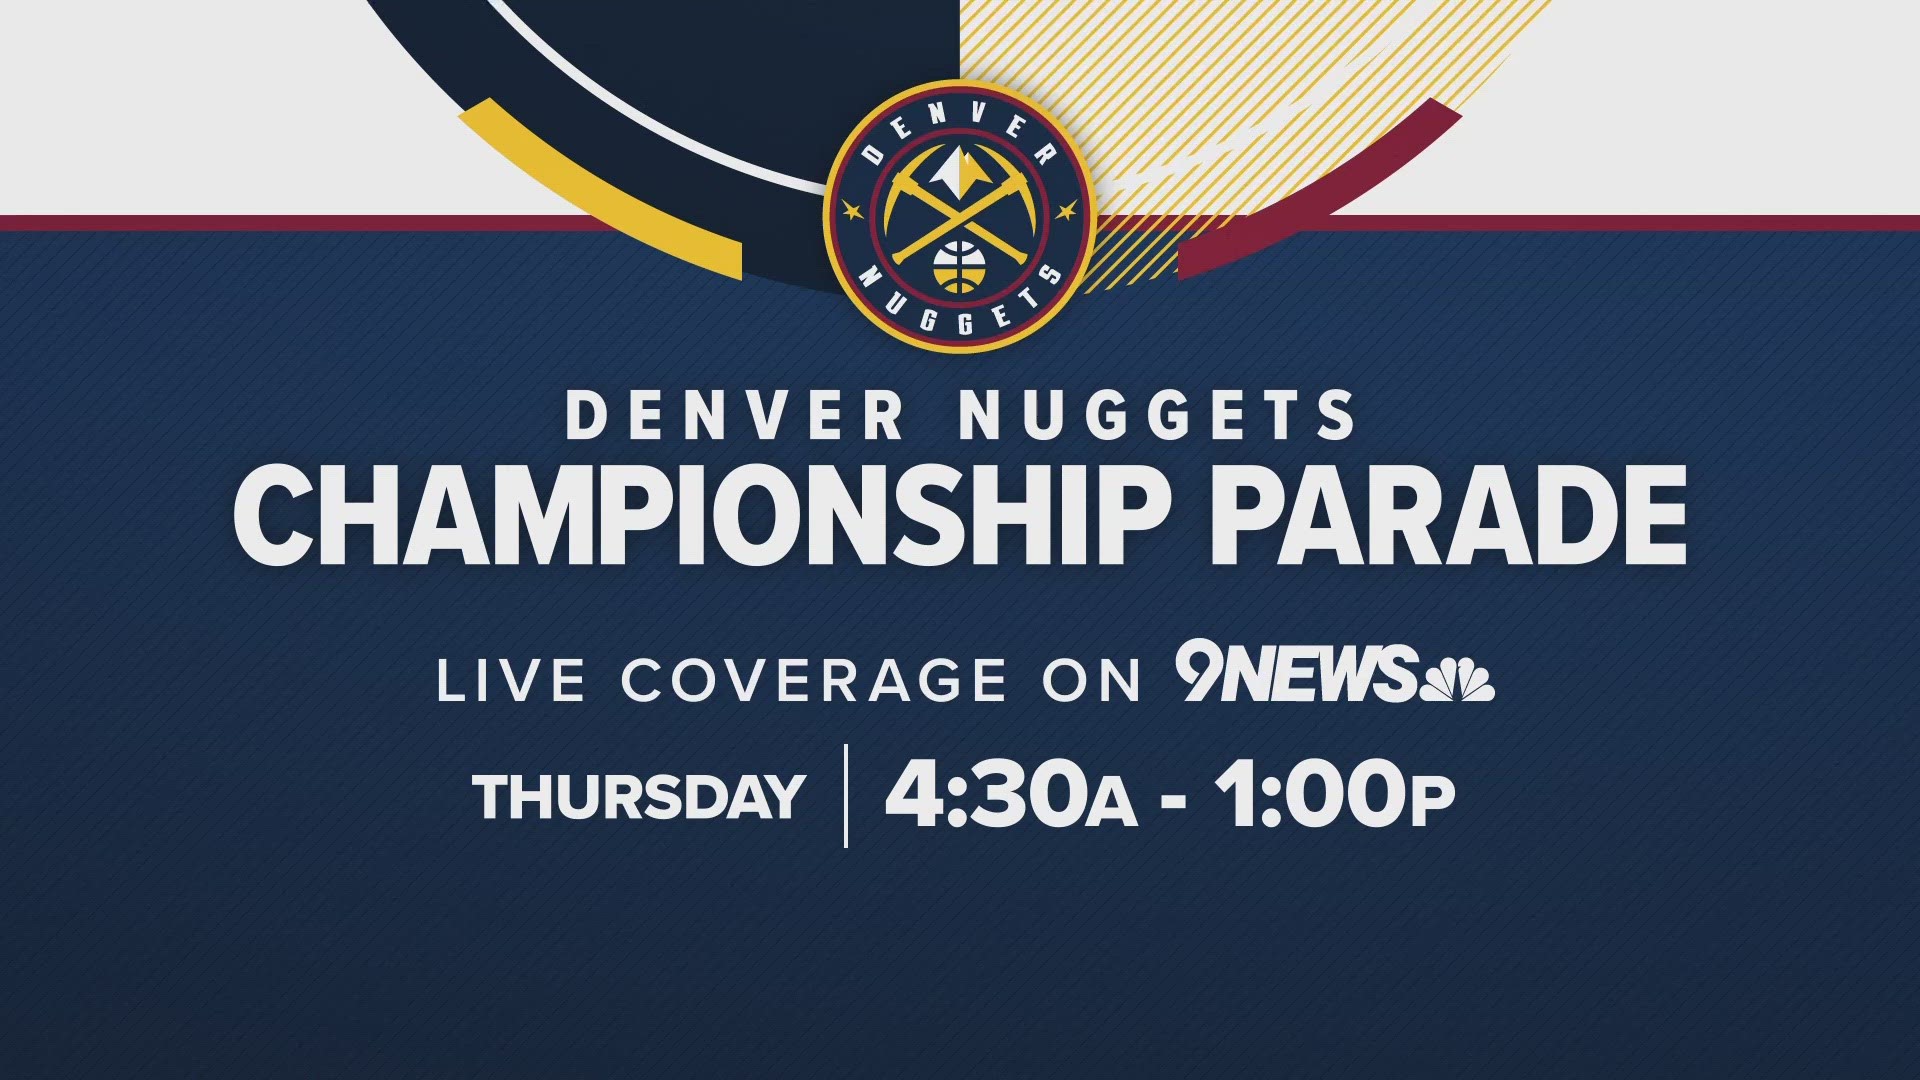 The Nuggets will celebrate their new championship trophy with a parade and rally Thursday in downtown Denver.